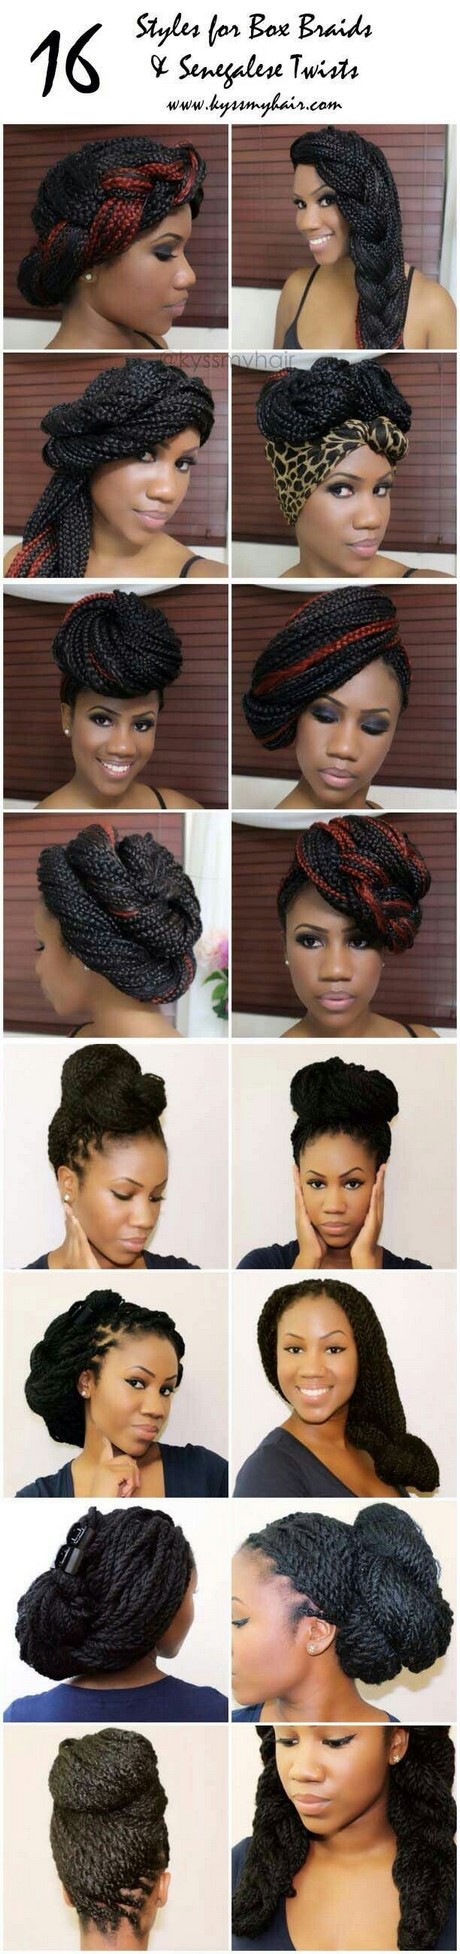 styles-to-do-with-braids-85_15 Styles to do with braids